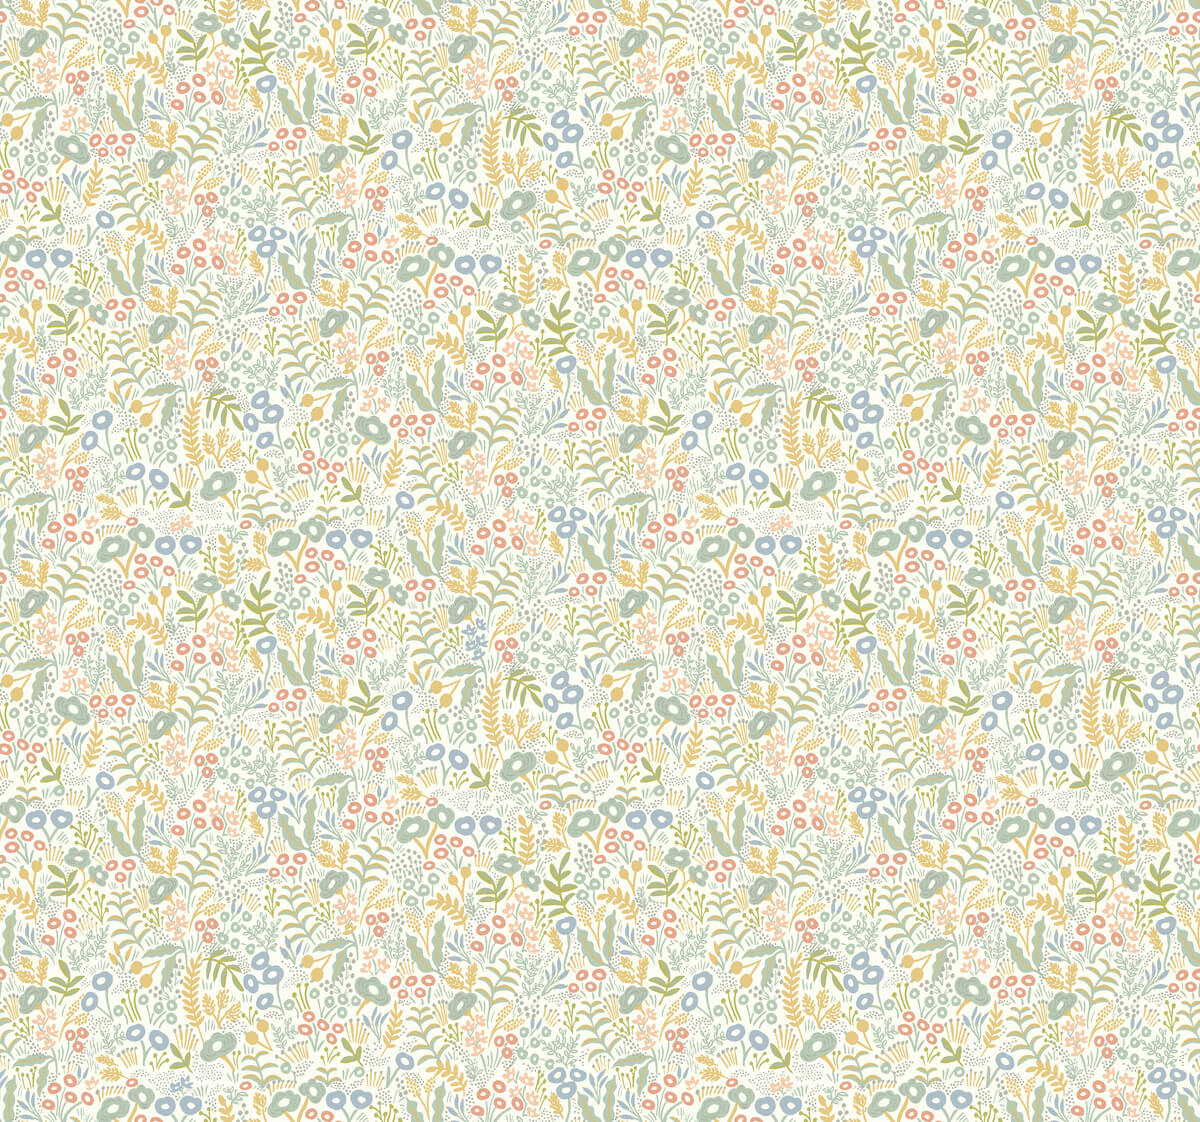 Rifle Paper Co. Tapestry Wallpaper - SAMPLE